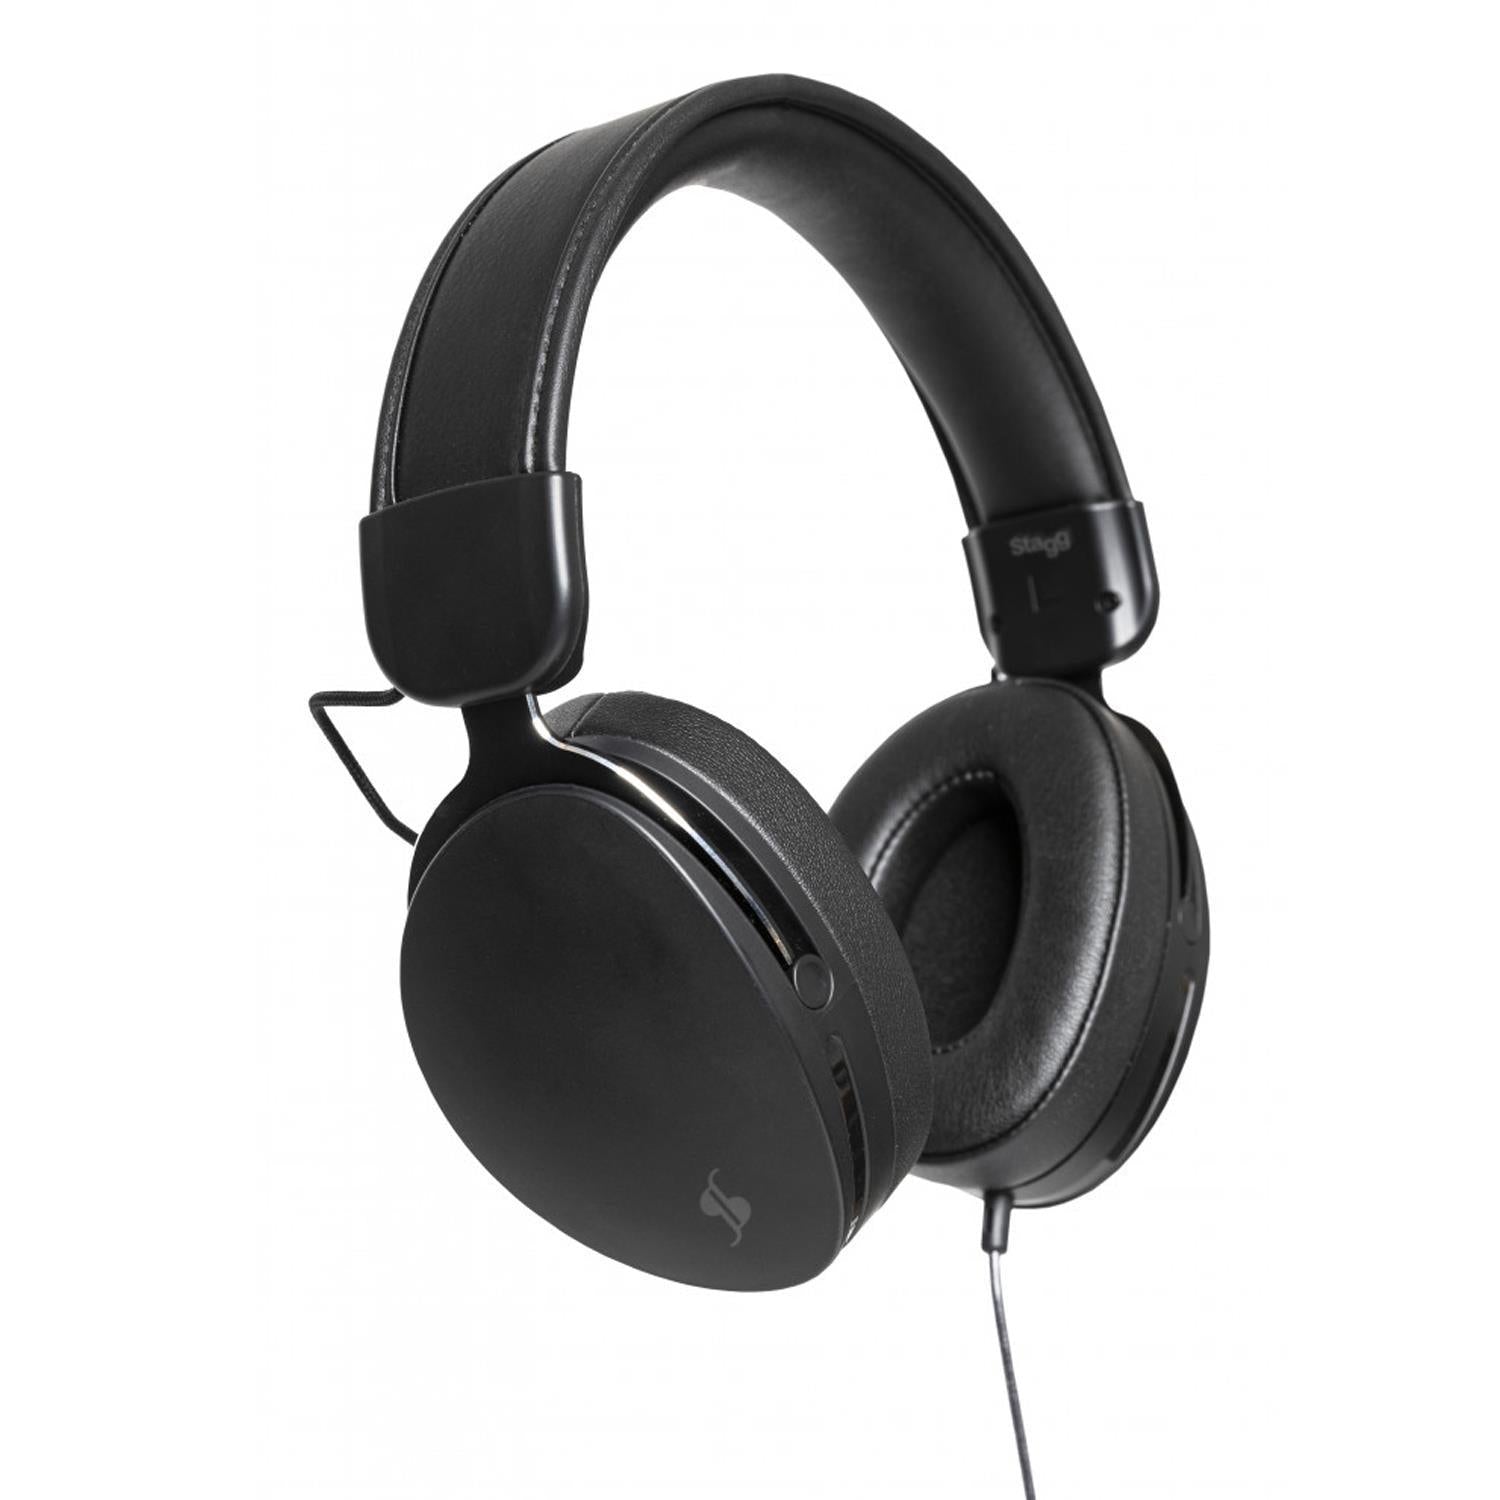 Stagg SHP-5000H Studio Stereo Headphones - DY Pro Audio